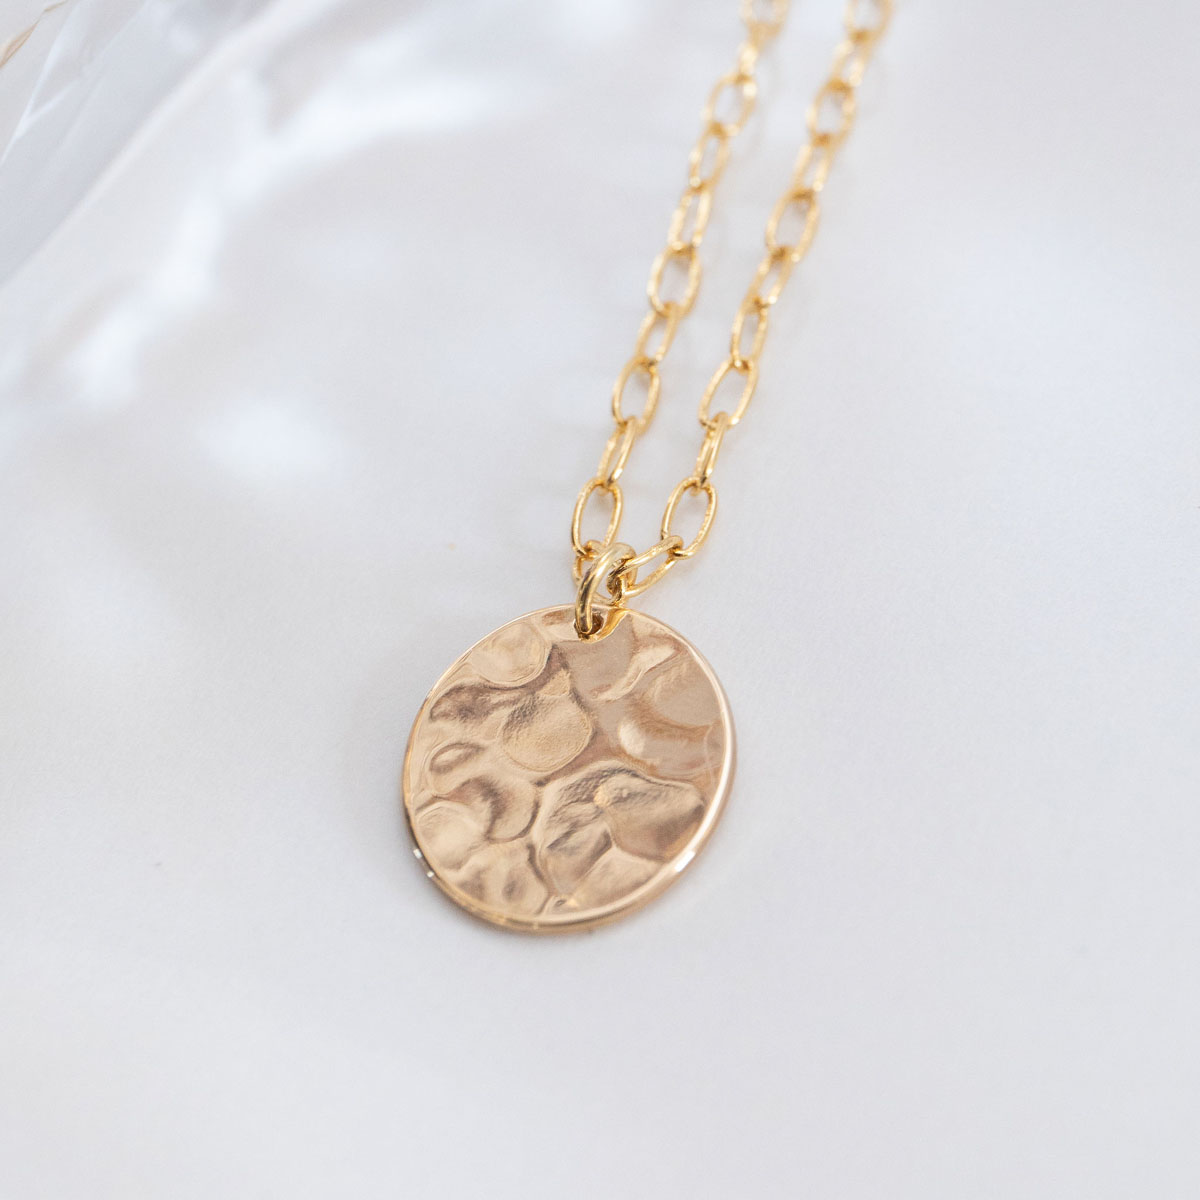 Product image of the the Meridian Necklace, a gold hammered oval pendant on a dainty paperclip chain.